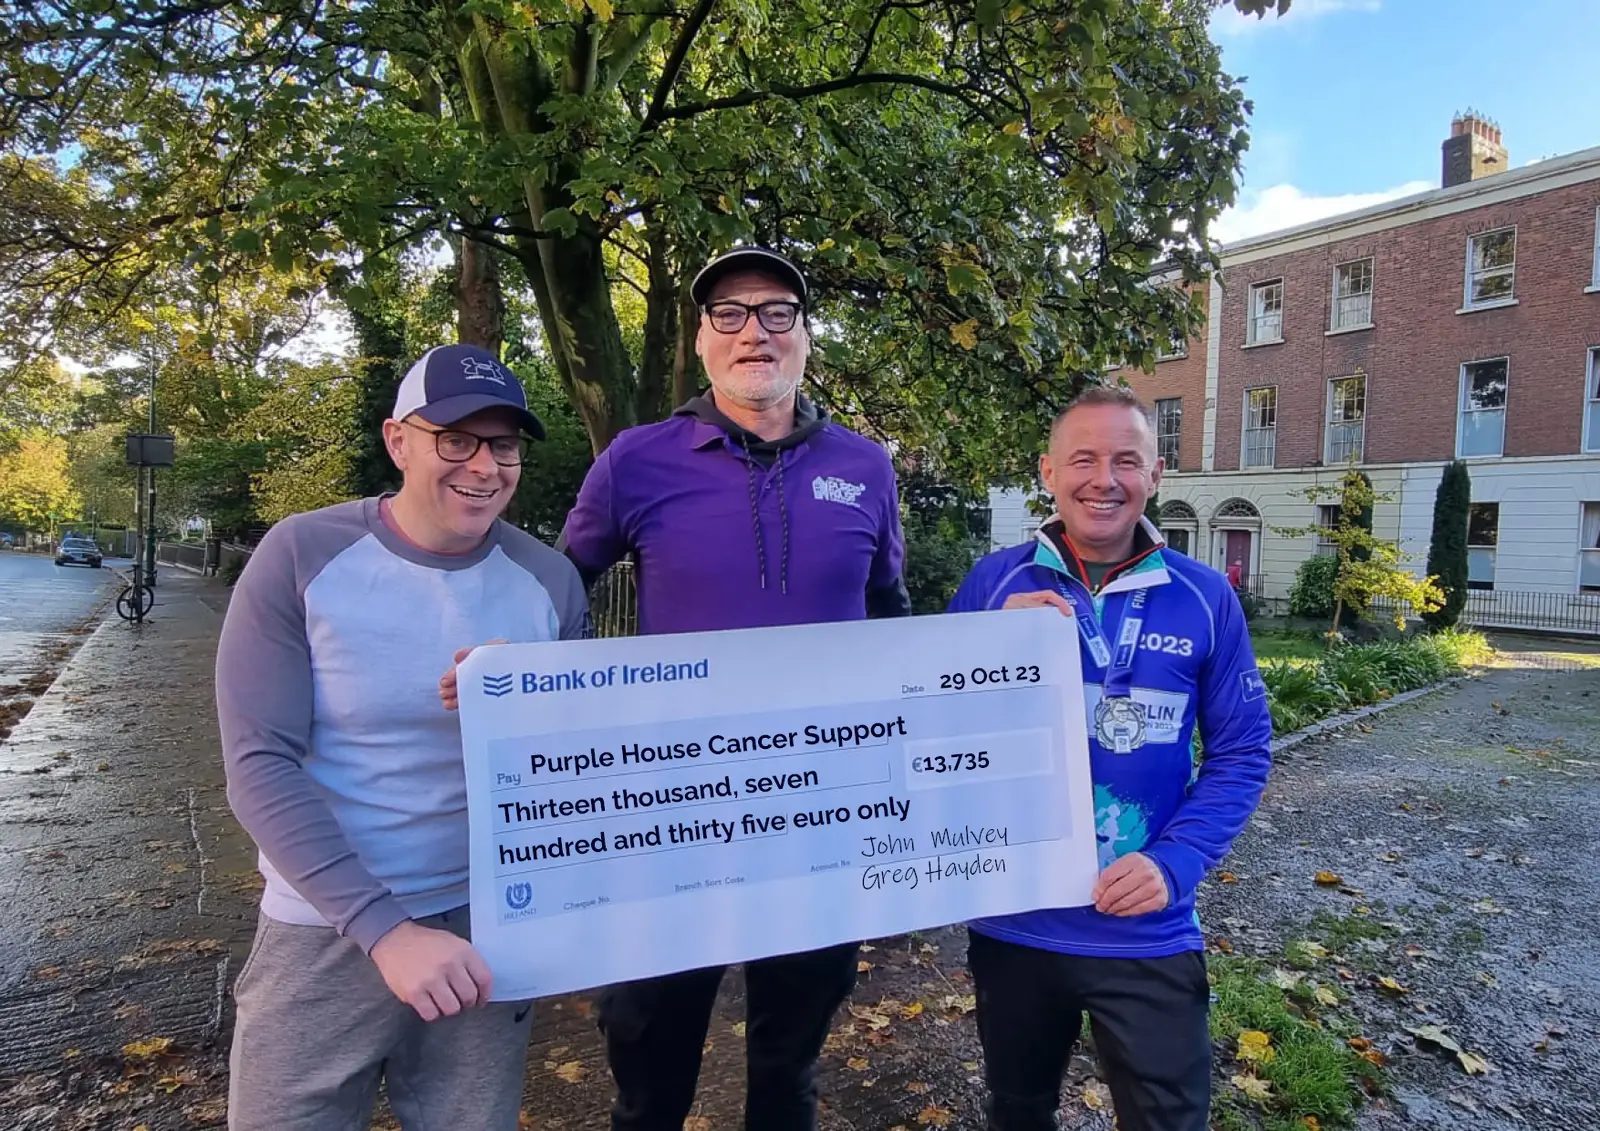 Pictured Left to Right: John Mulvey (Director, Fusion 4 Quality), Tom Doyle (Purple House Cancer Support), and Greg Hayden (CEO, Ethos Engineering) with the cheque after the Dublin Marathon